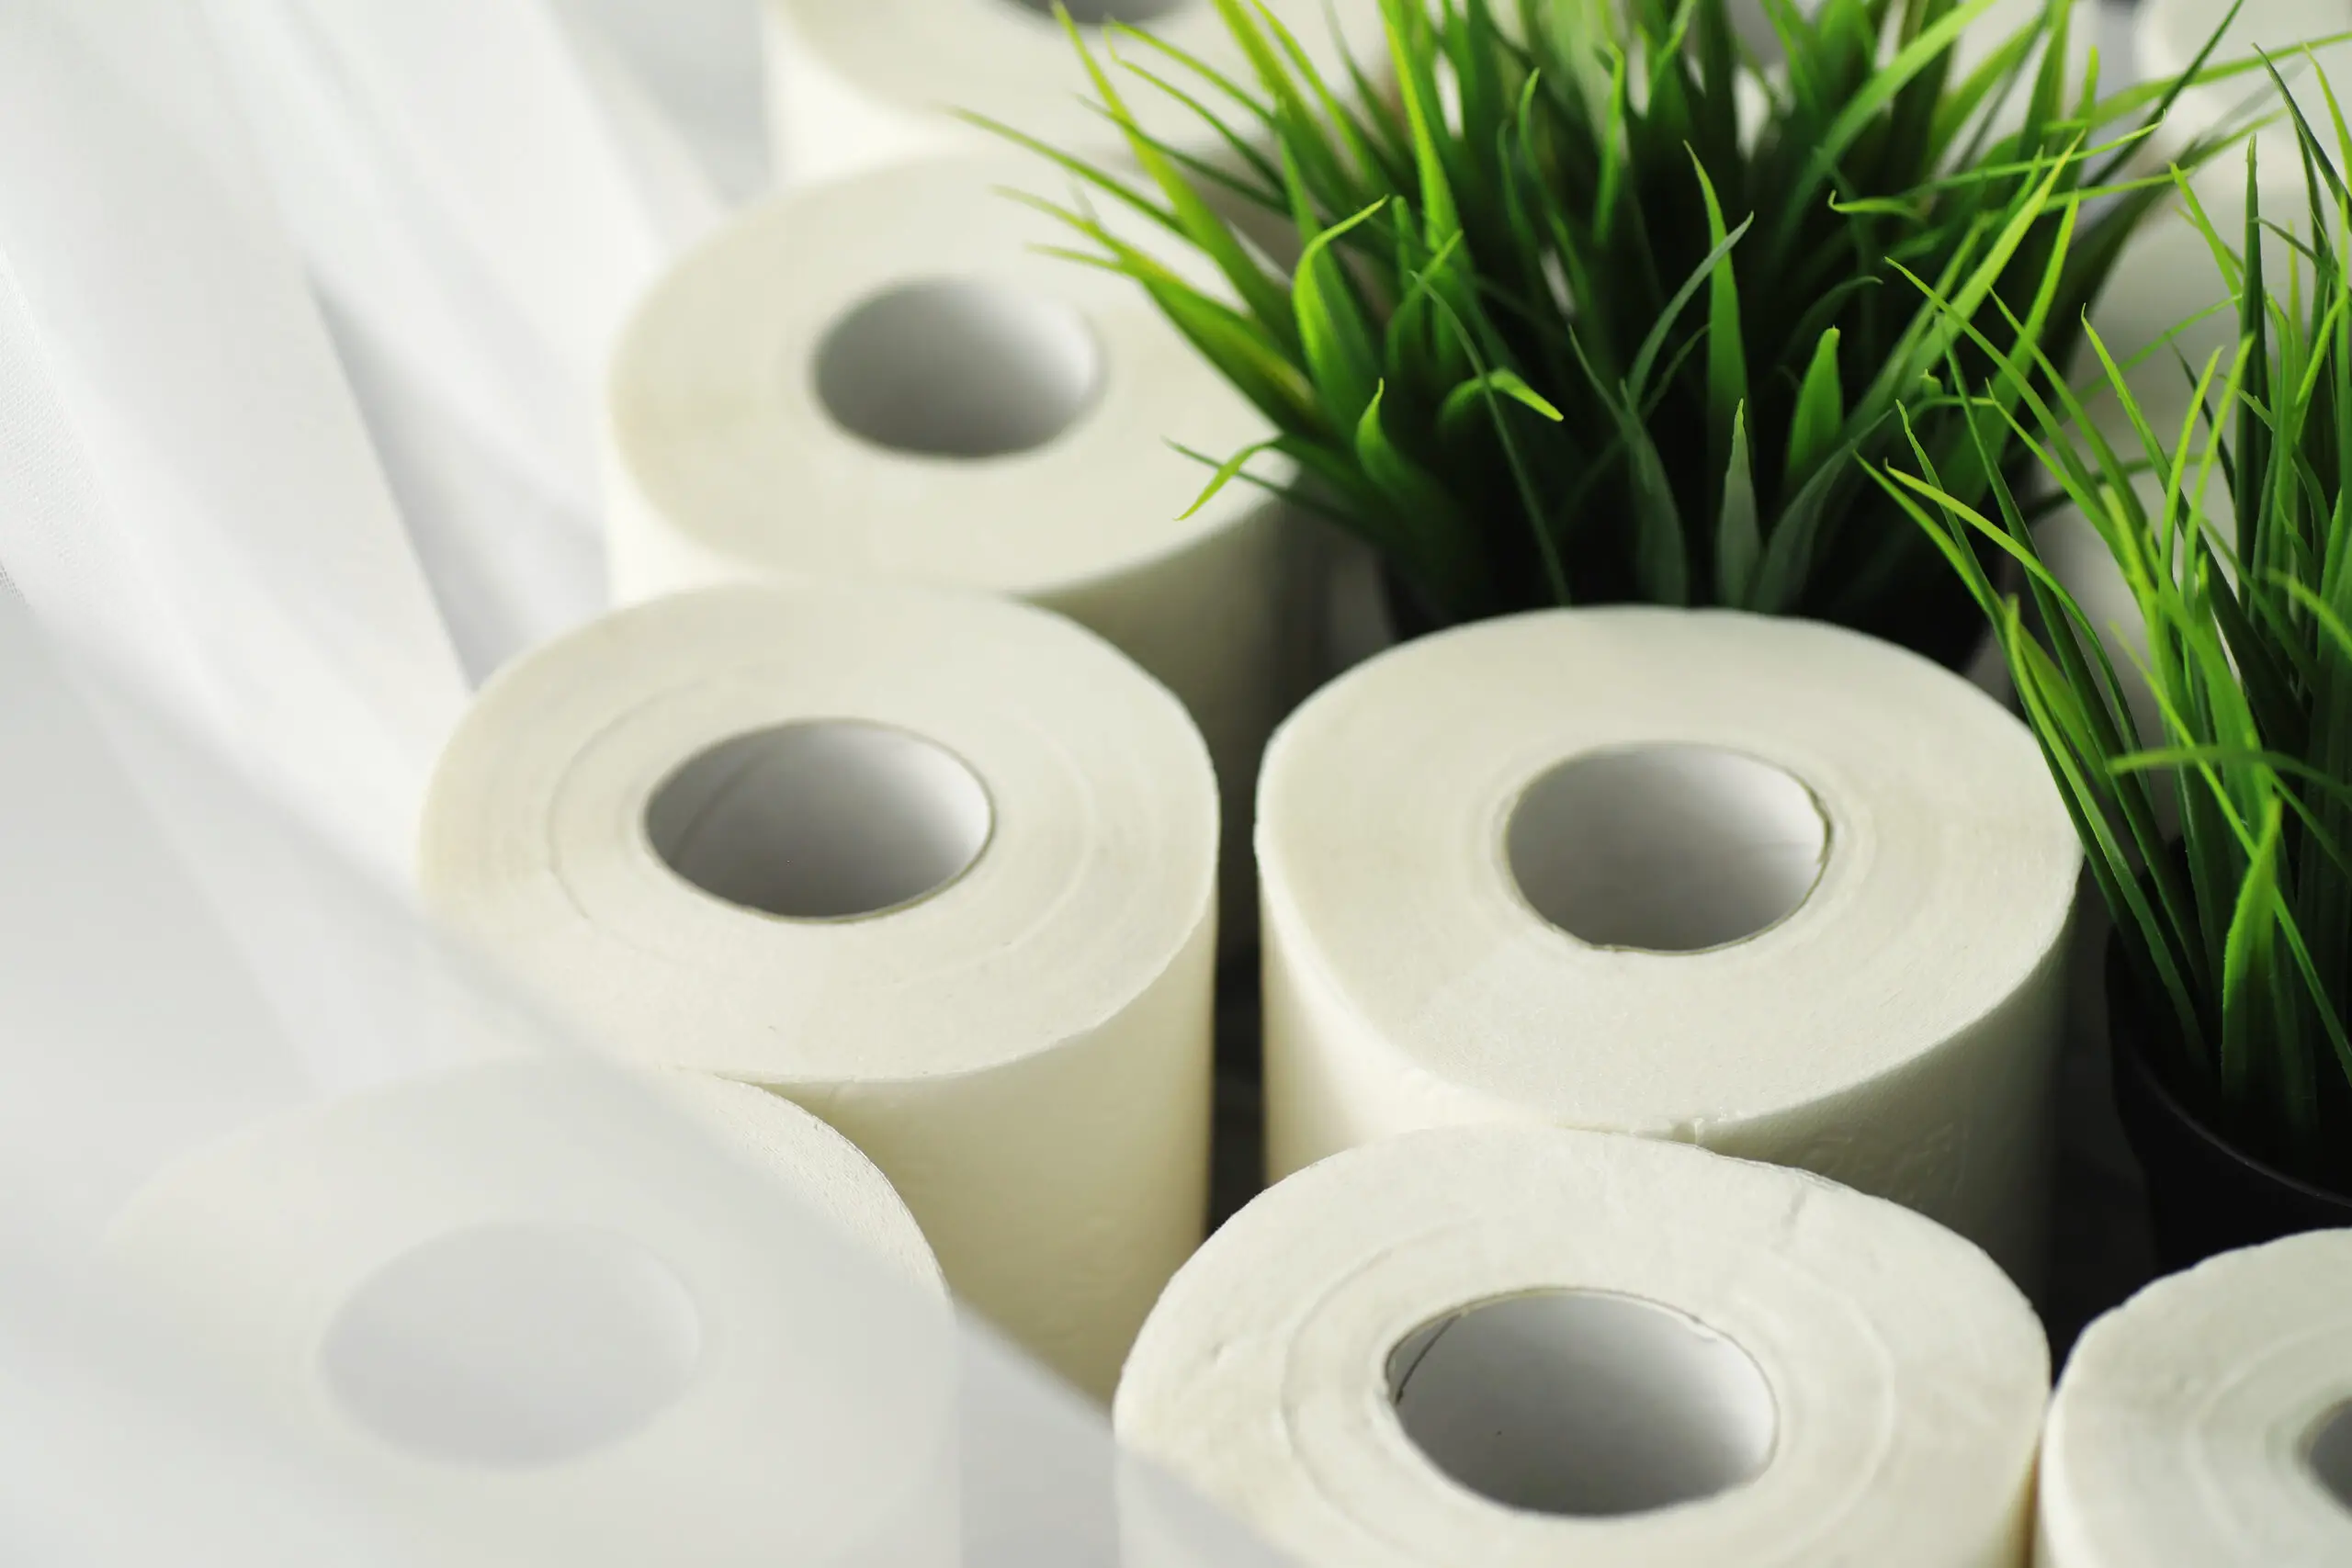 Rolls-of-toilet-paper-with-the-plant-inside-as-a-seedling-tree